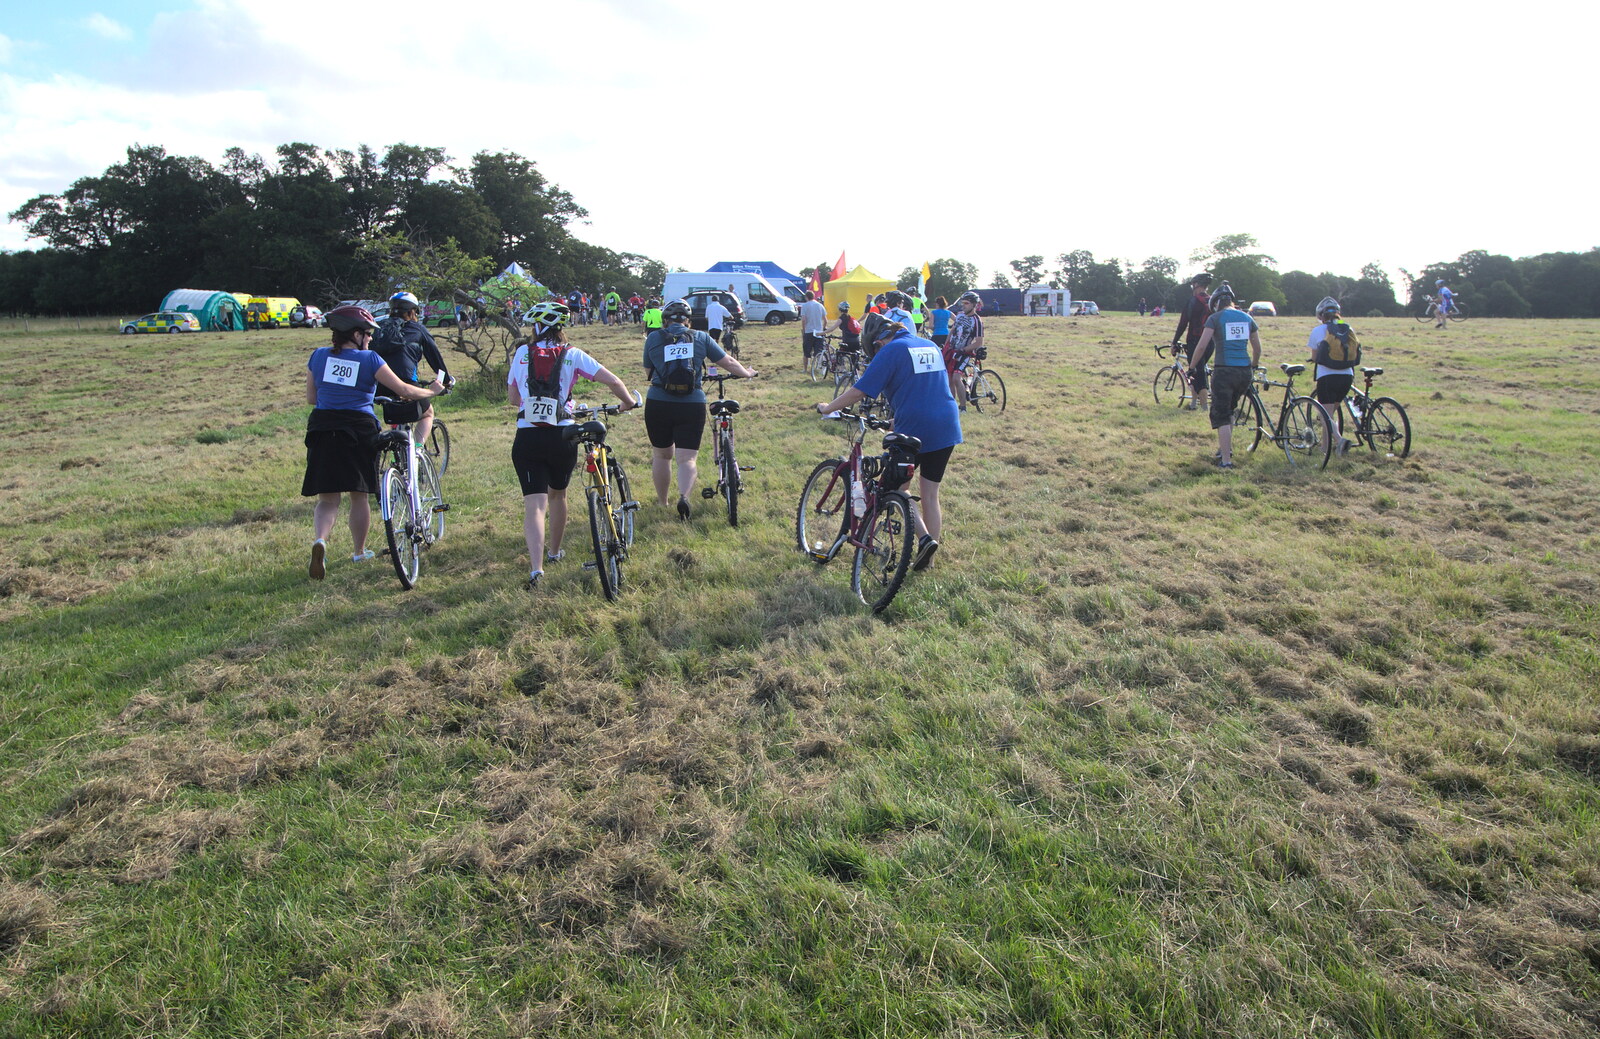 The riders head off across the grass from The RSPB Charity Bike Ride, Little Glemham, Suffolk - 5th August 2012